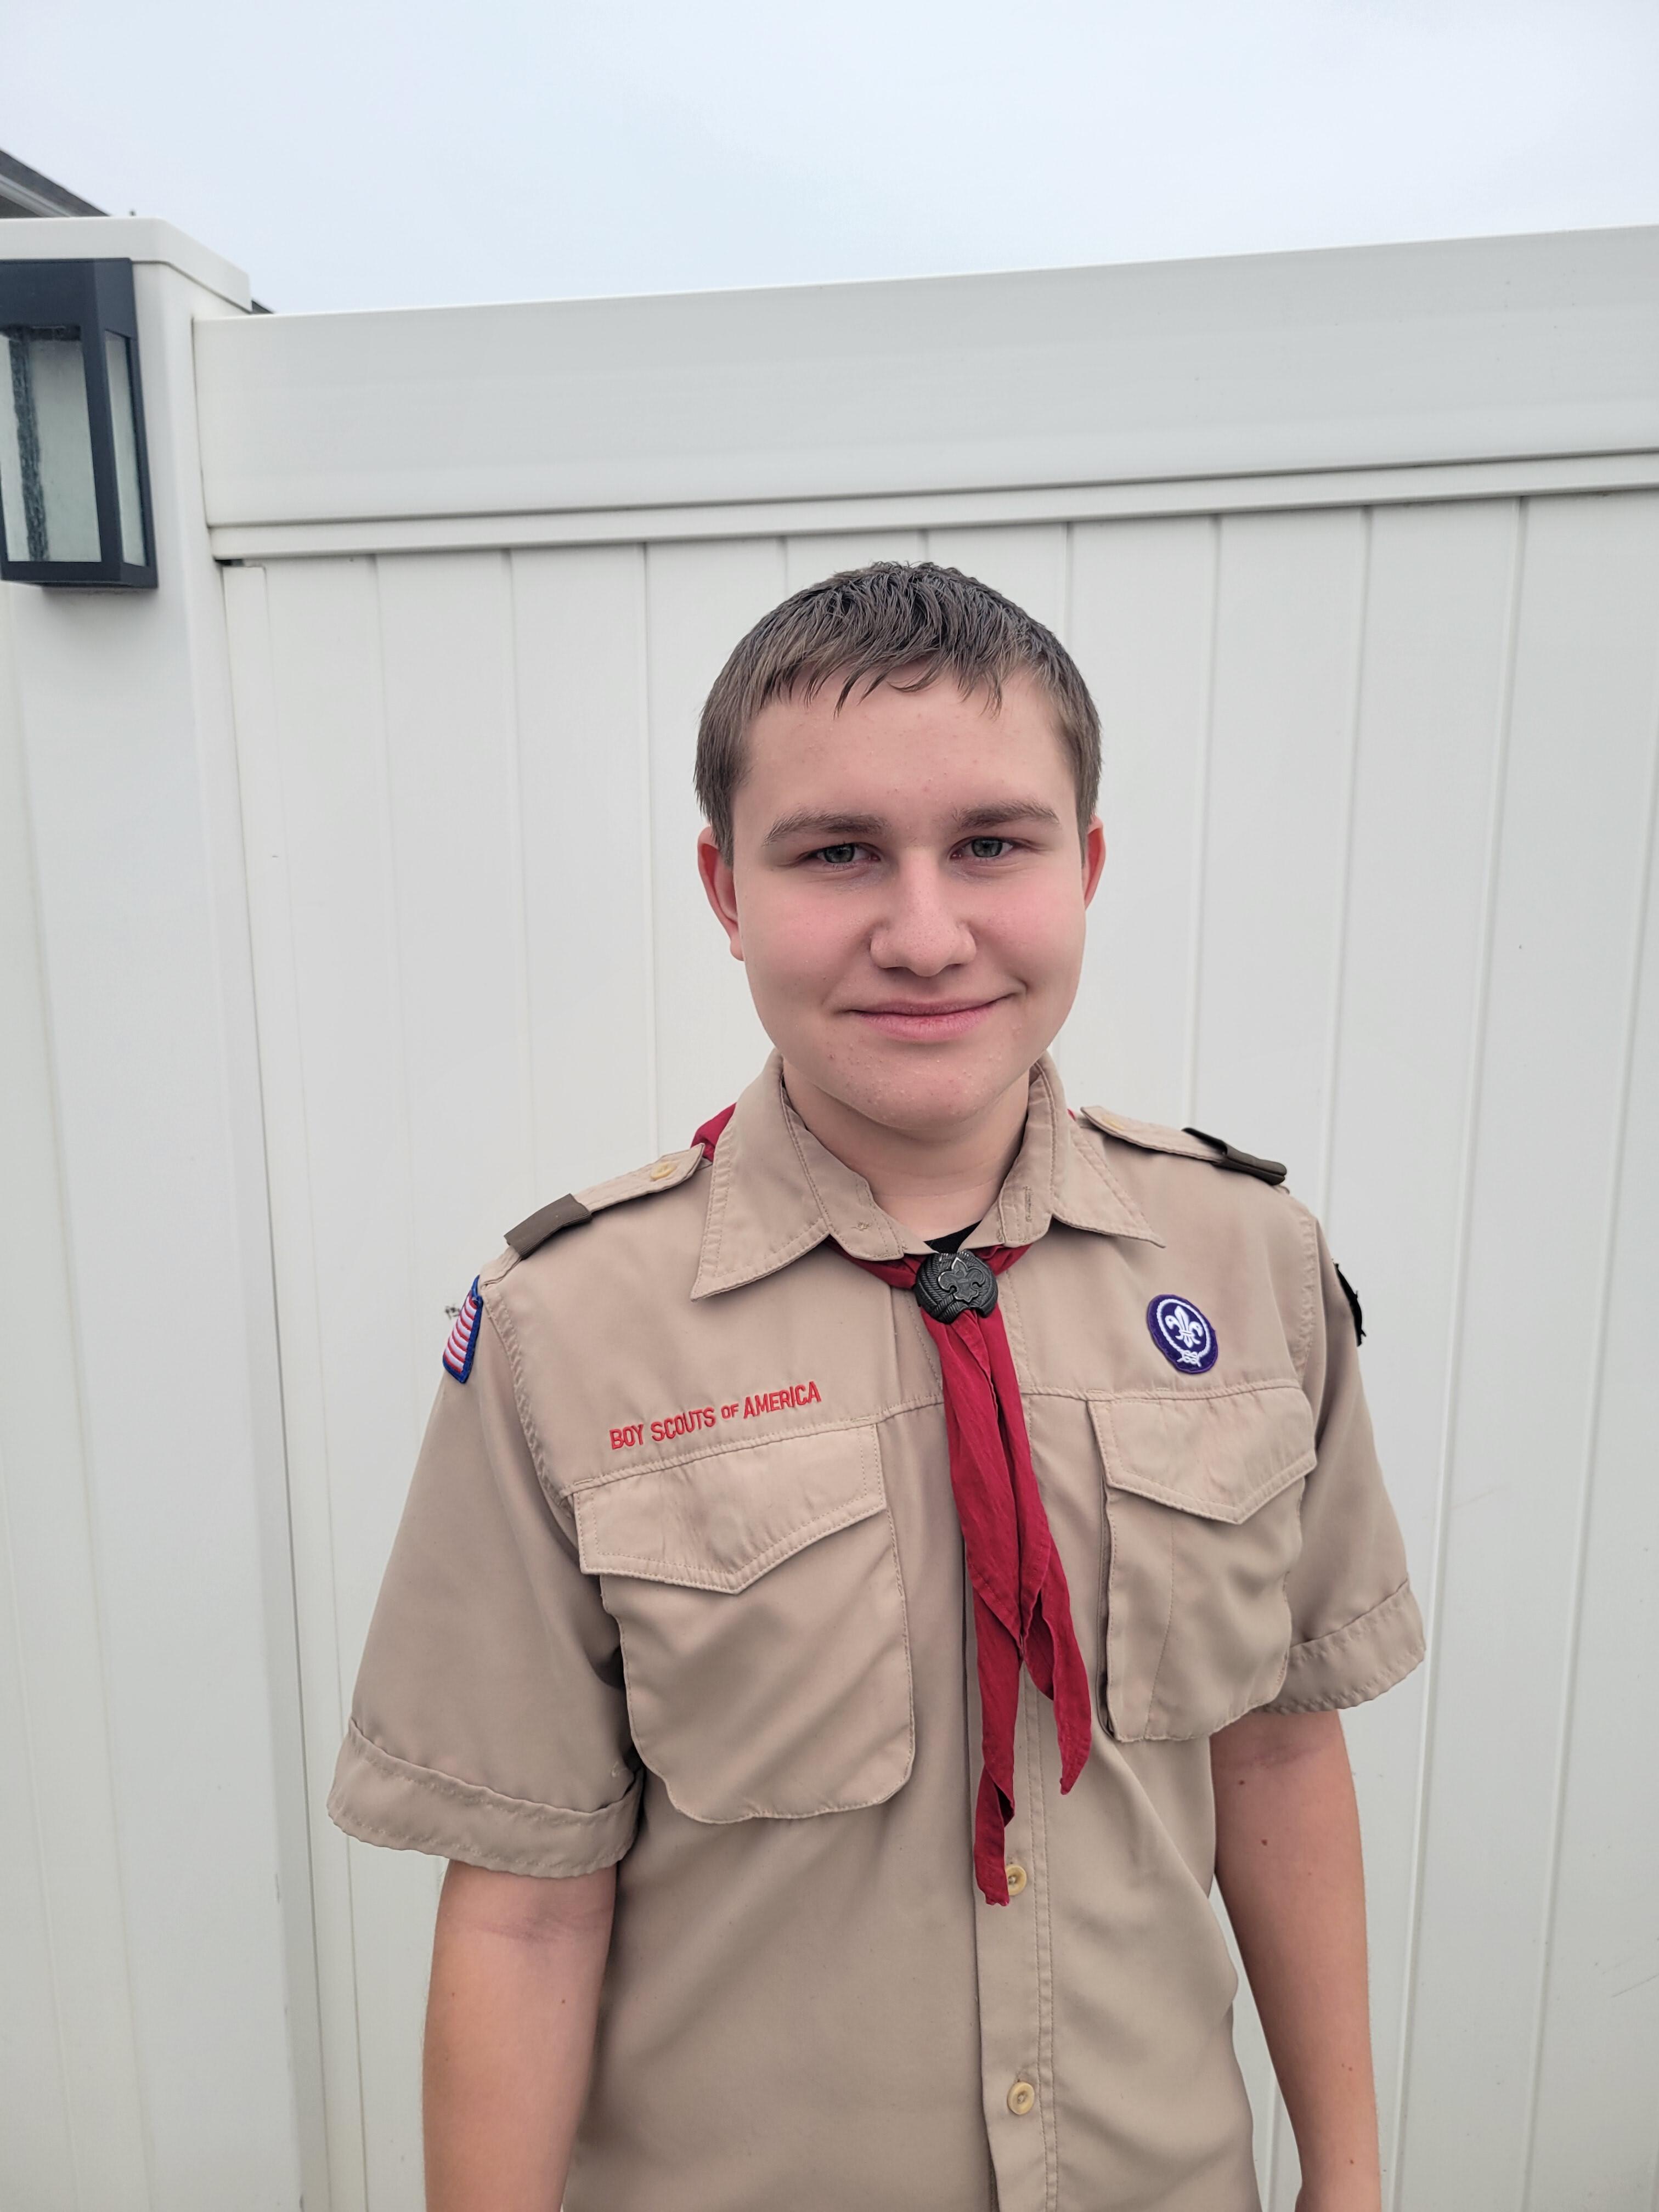 Junior Nathan Collins is fundraising to build a dog park in Munhall for his Eagle Scout project